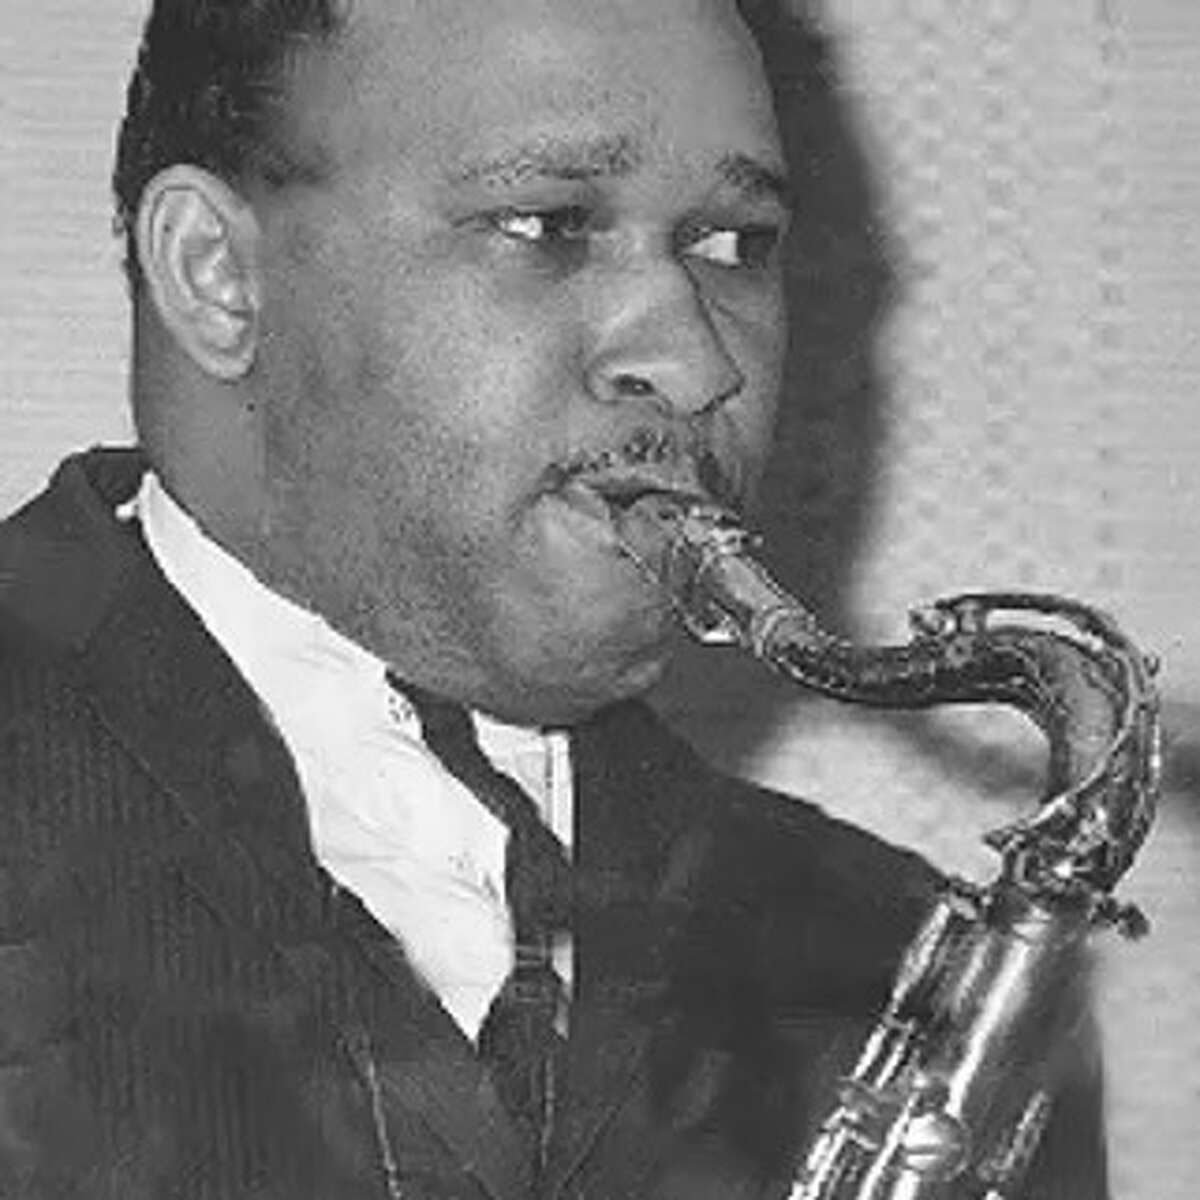 James Harold Young He was born in Beaumont, Aug. 3, 1937, and died in 1983, according to information from the Museum of the Gulf Coast's Music Hall of Fame page. Young composed "The Rains Came," a hit in the 1950s, but because of the name he chose for his band, "Big Sambo and the House Wreckers," the NAACP objected because of its obvious connection to the subjugation of Black people. Even though the 1960 track had sold a half-million copies from its recording at Cosimo Matassa's studio in New Orleans with notorious Southeast Texas producer Huey Meaux, the NAACP-caused name change of the band lost the track's original recognition. Whether that was an early form of controversial "political correctness" is unrecorded, but the obvious connection to the slave-era condescension is clear enough. By the 1970s, the "House Wreckers" were no more and Young had married a public school teacher, settling in Port Arthur and working for the city. He helped clean up after shows at the Port Arthur Civic Center when it opened in 1979 and played in its Fifties Rock Show in 1981, which he headlined. After the show, he still helped clean up.